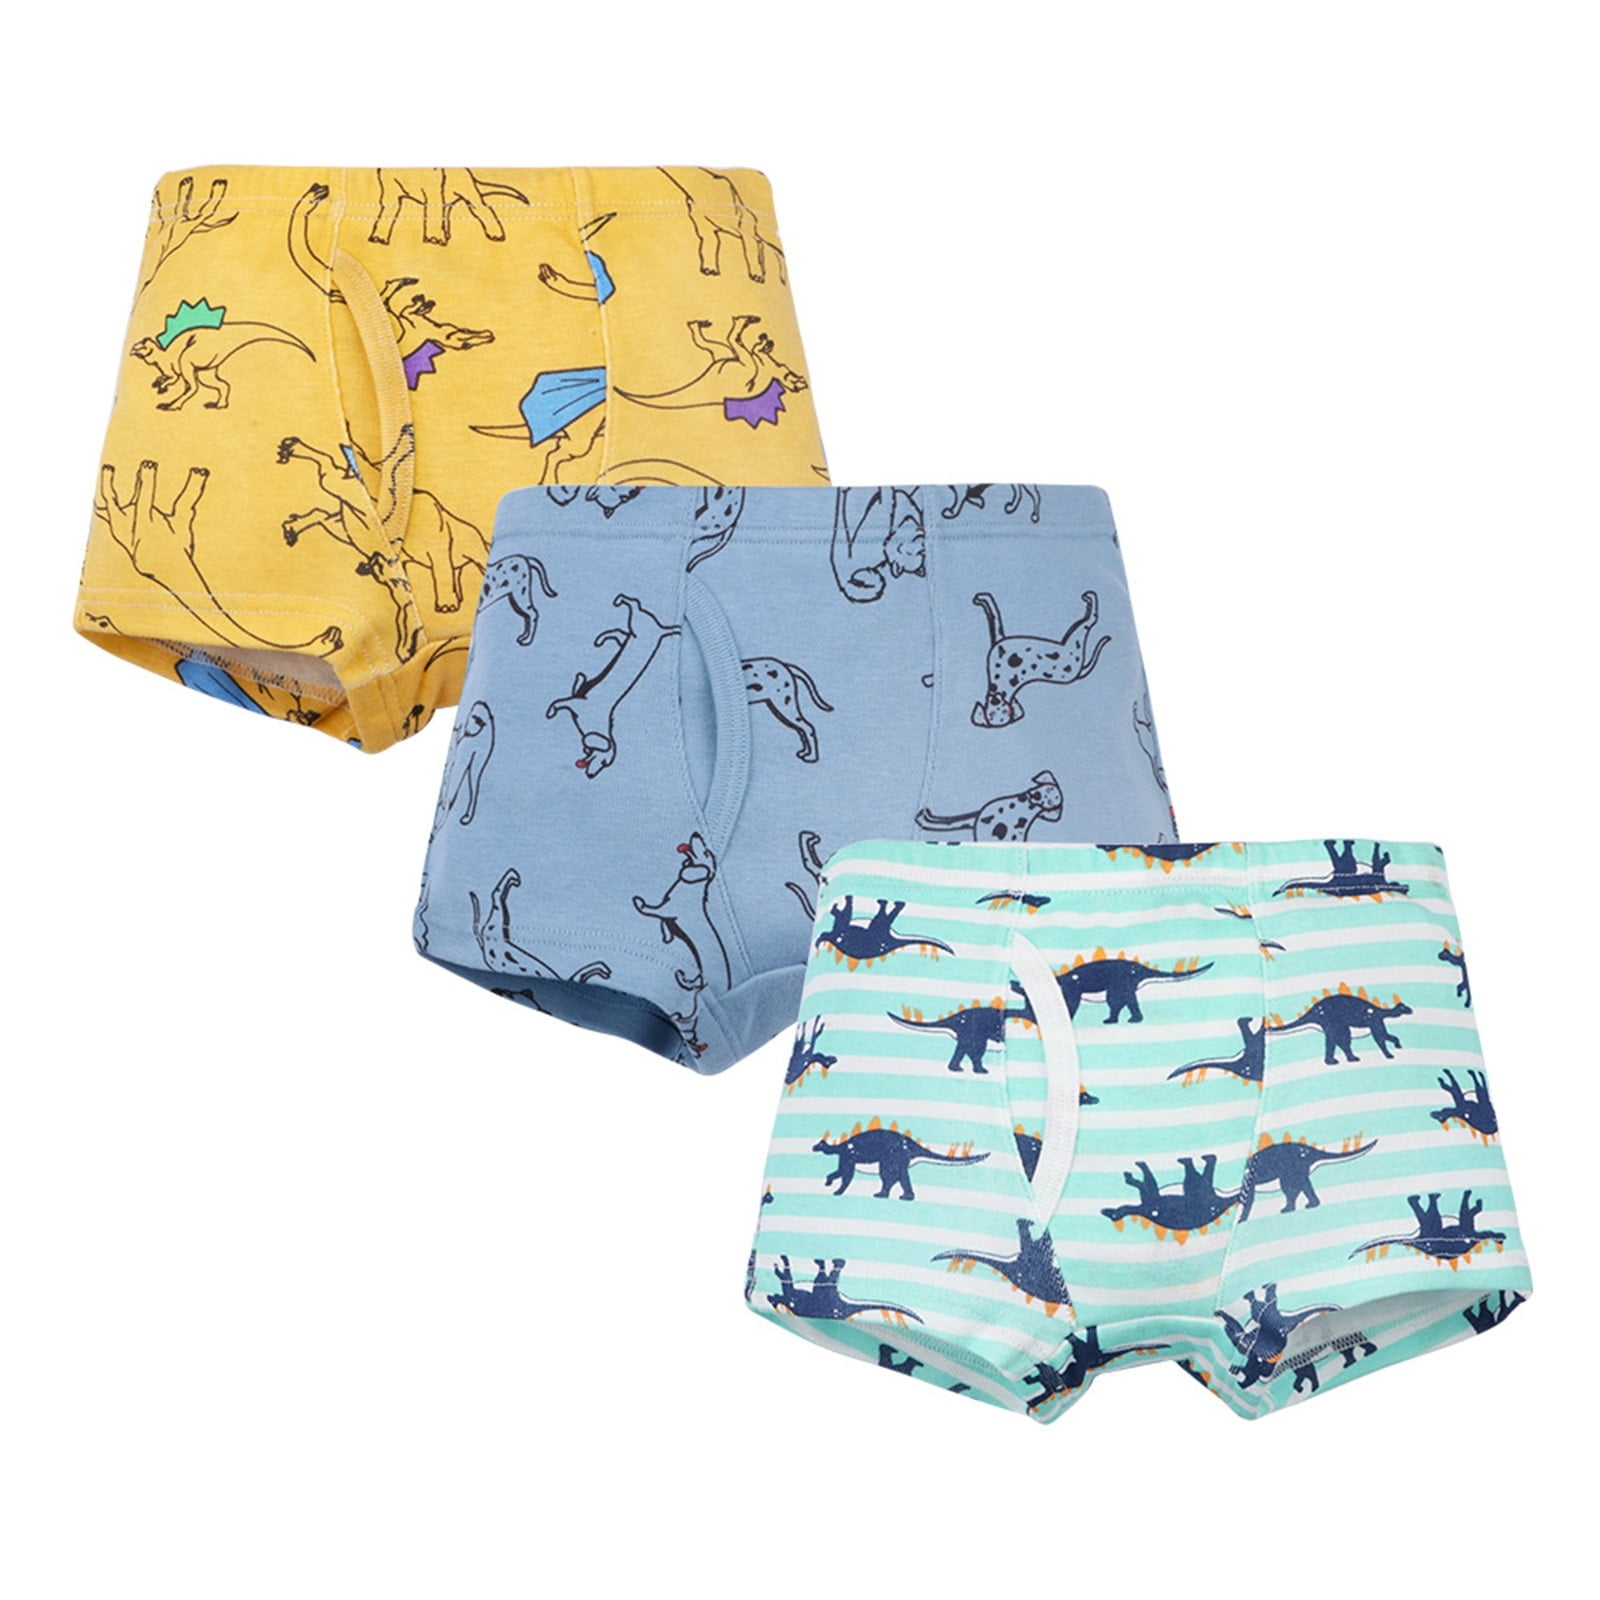  Cczmfeas Boys Toddler Dinosaur Cotton Underwear Boxer Briefs 6  Pack (6 Years, 6 Pack- Blue): Clothing, Shoes & Jewelry